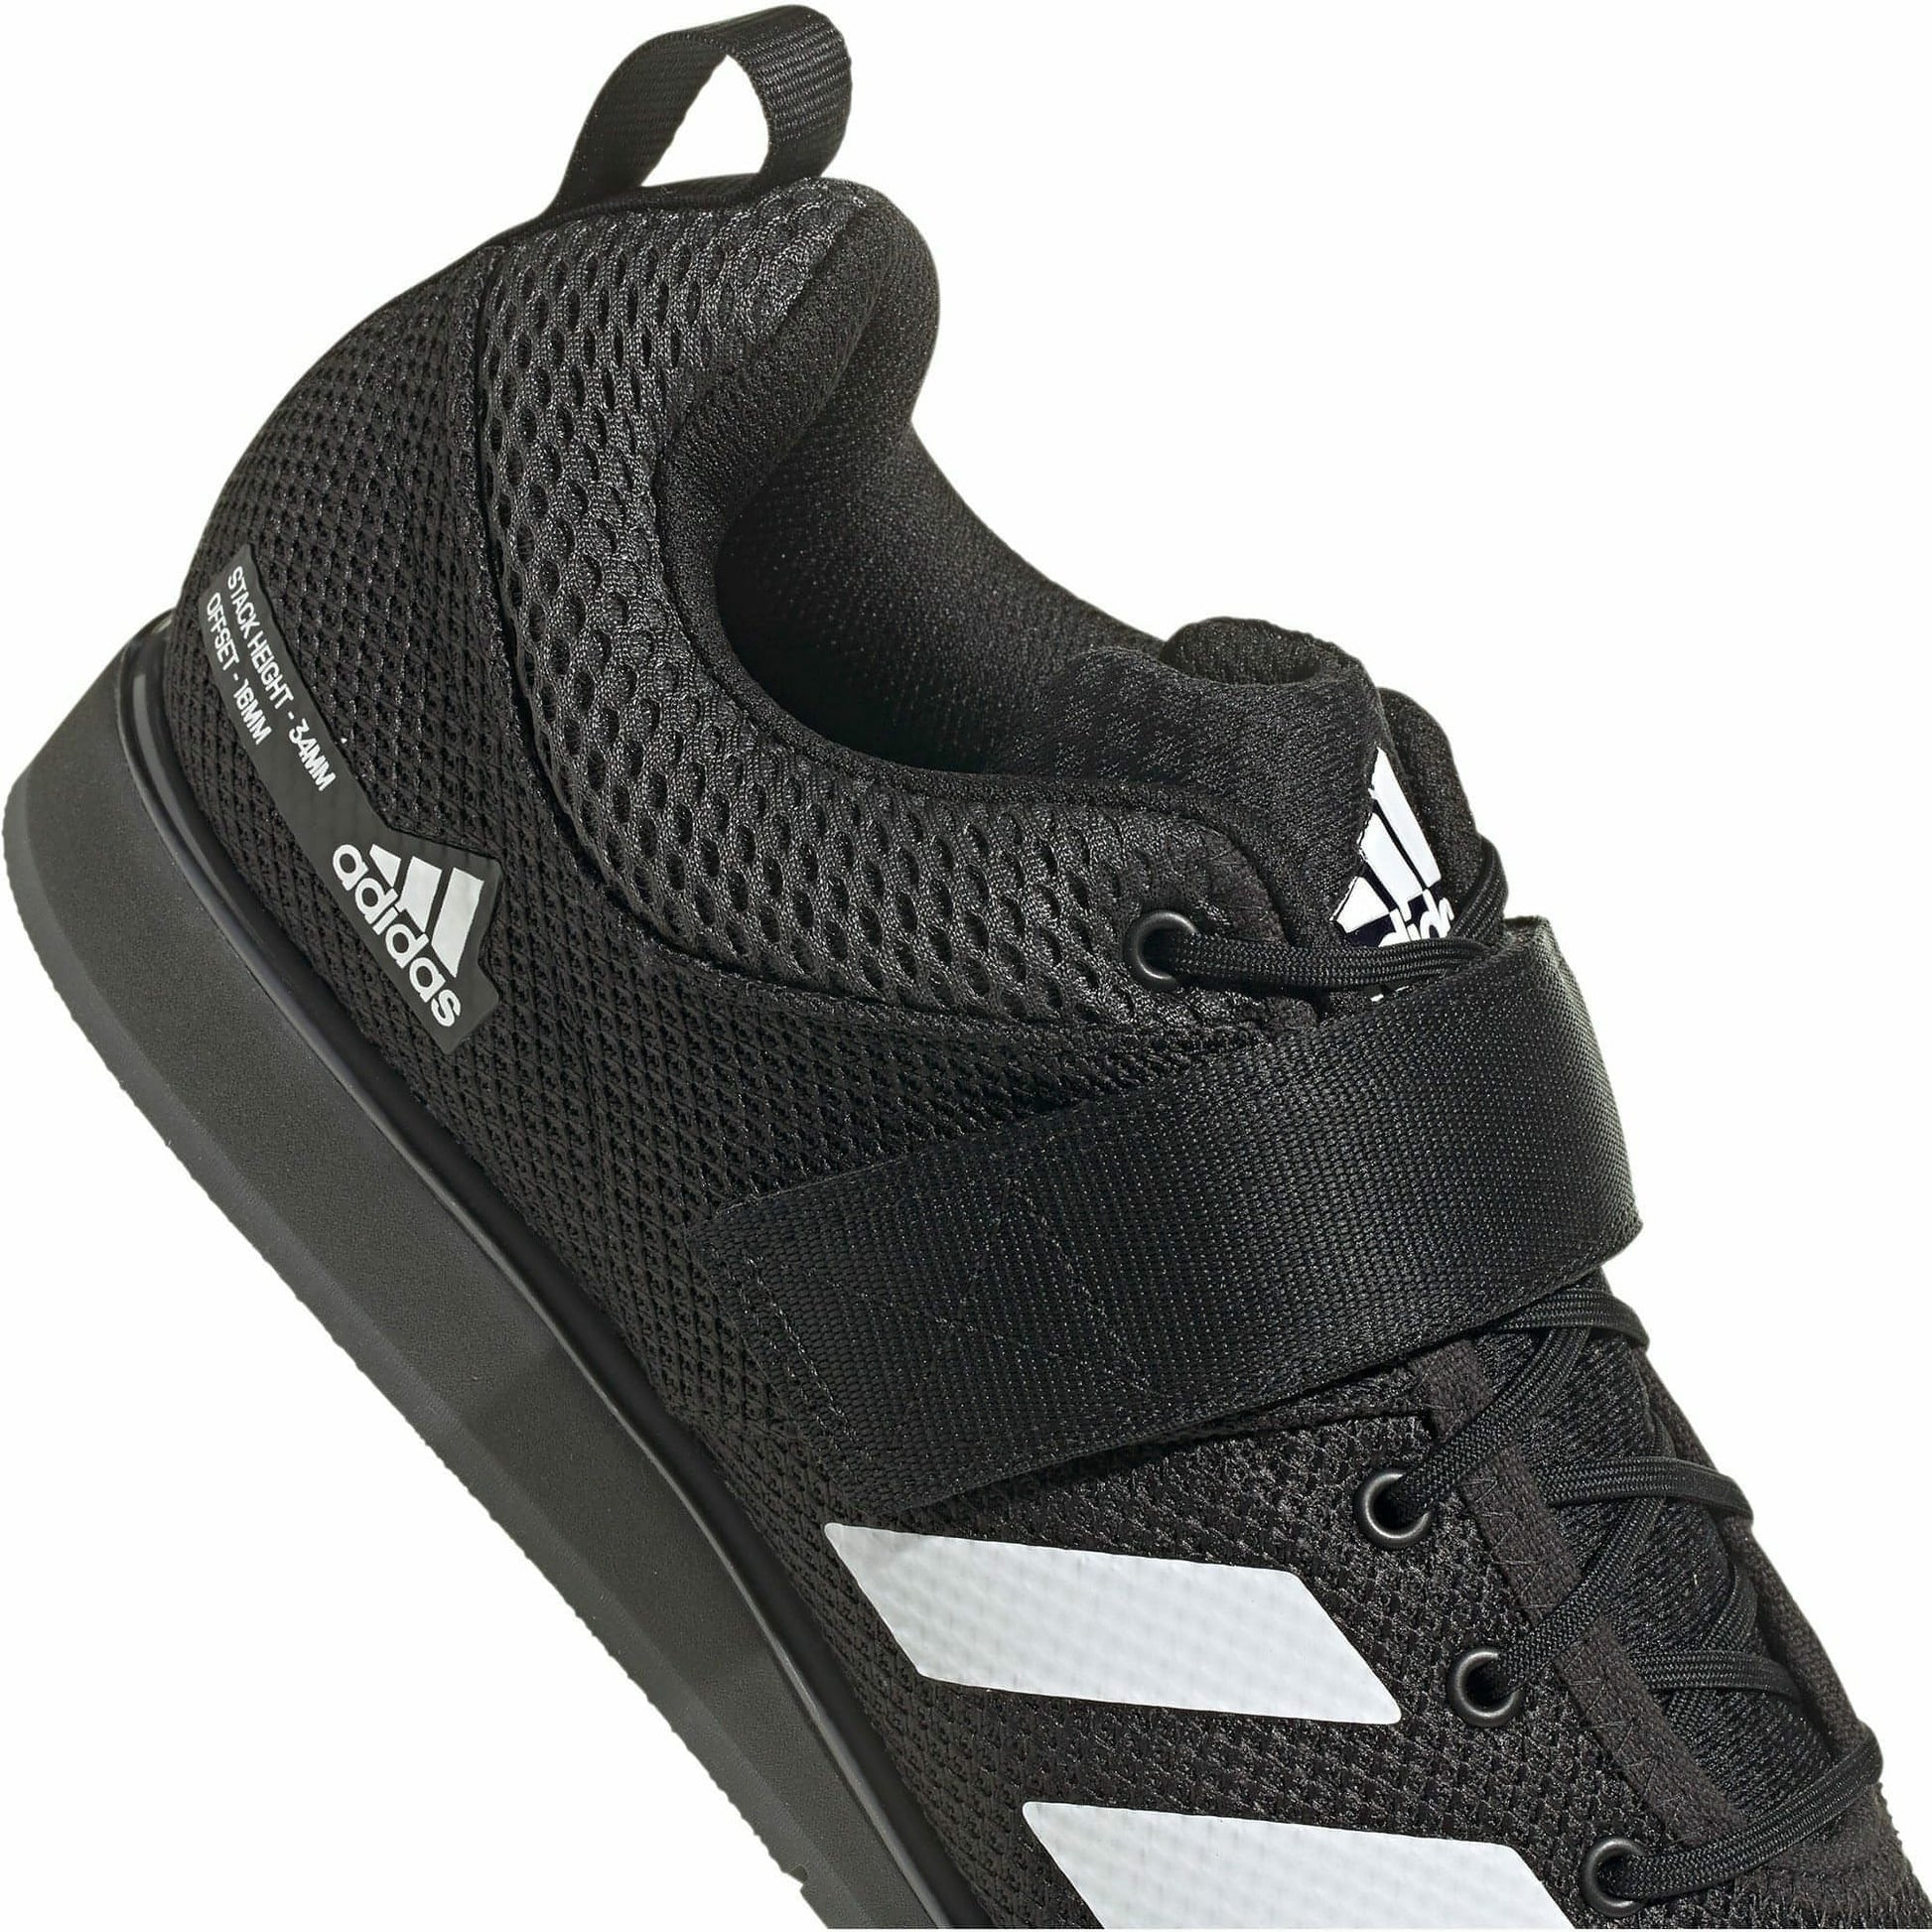 Adidas Powerlift Gy8918 Details